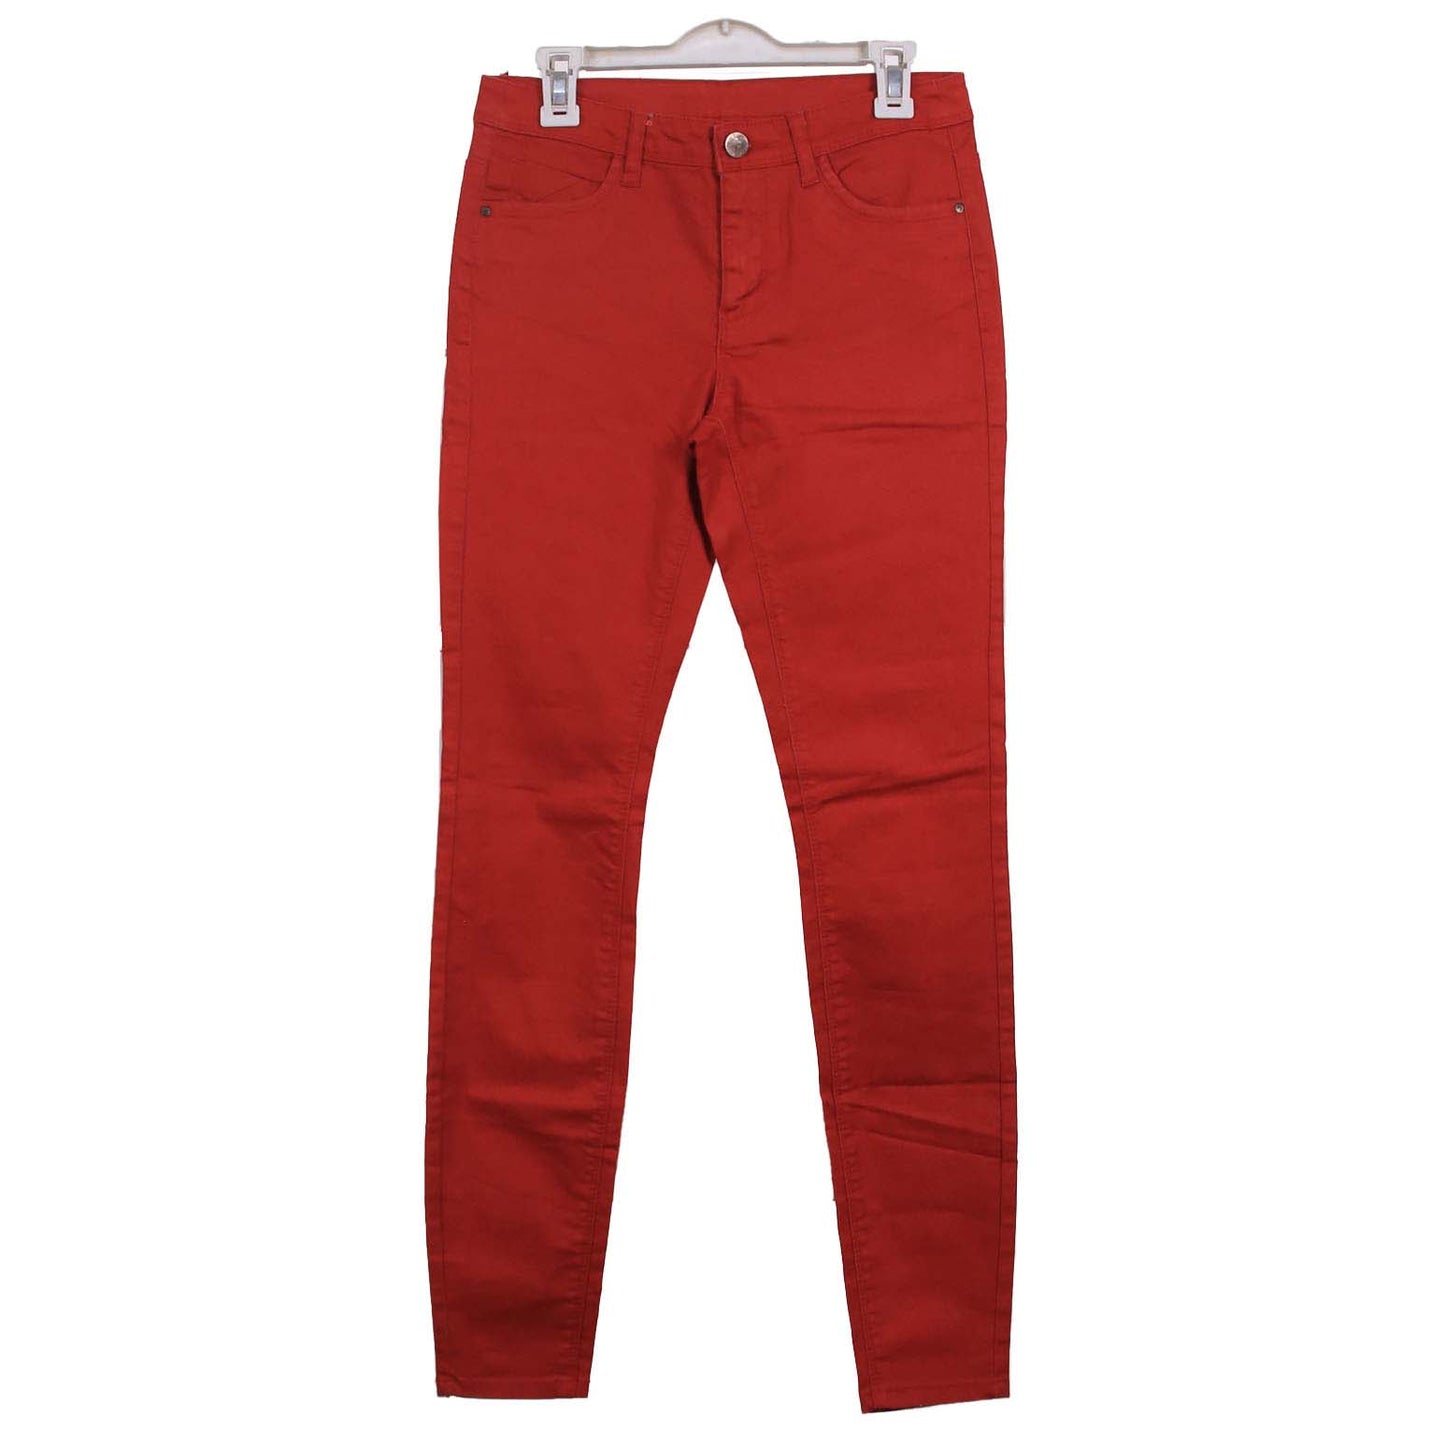 C & A  YESSICA RED DENIM JEANS